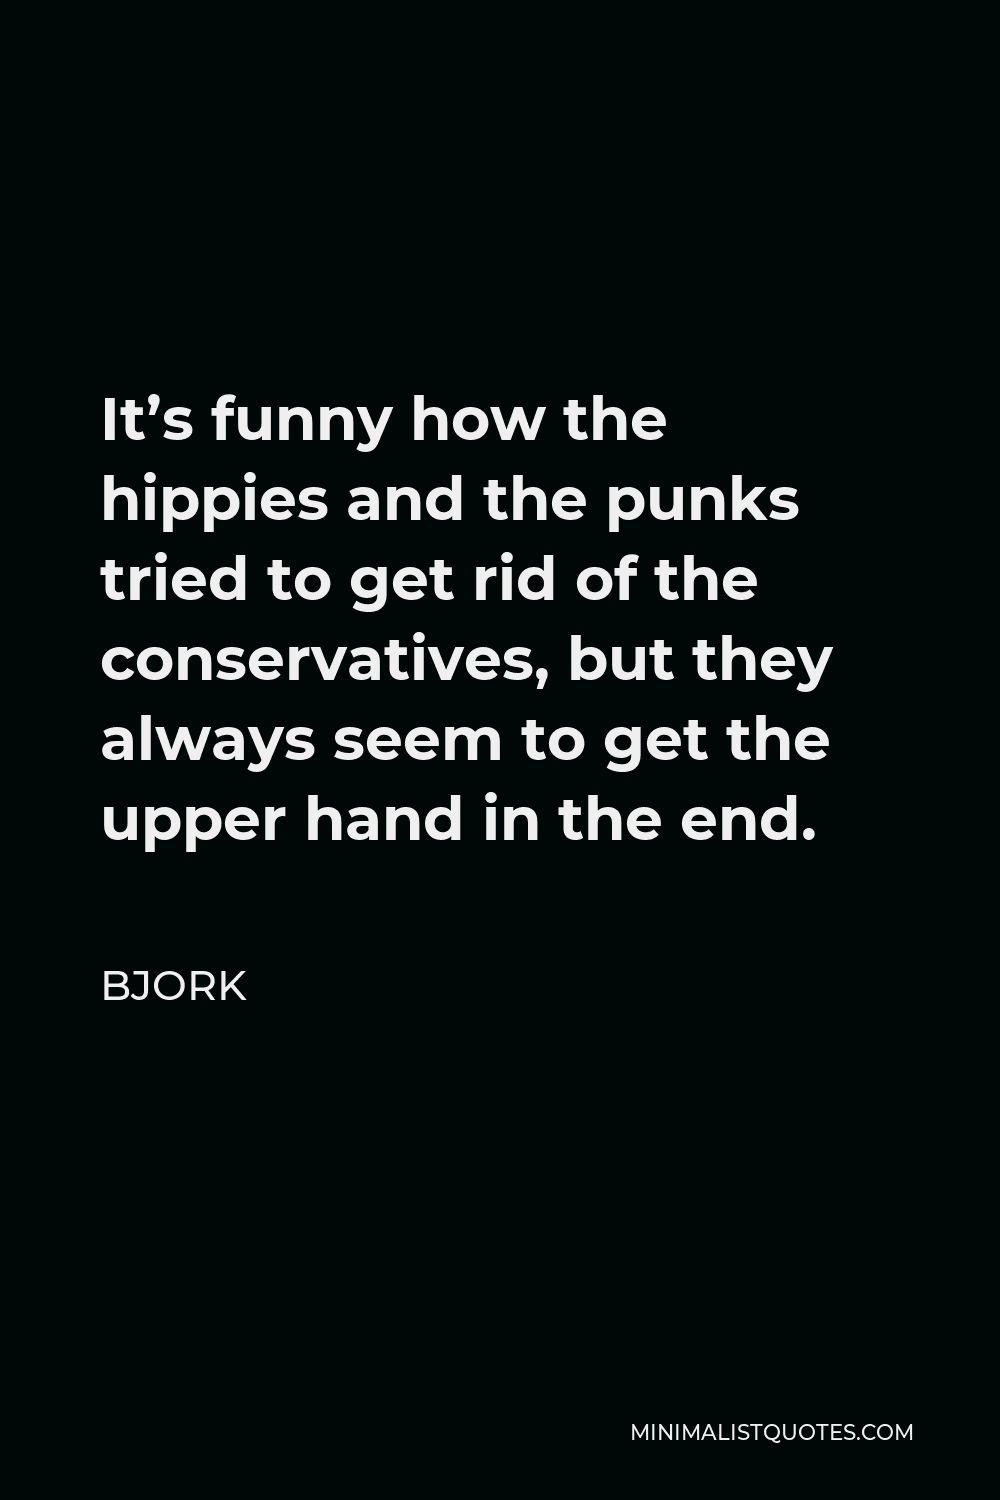 Bjork Quote - It’s funny how the hippies and the punks tried to get rid of the conservatives, but they always seem to get the upper hand in the end.